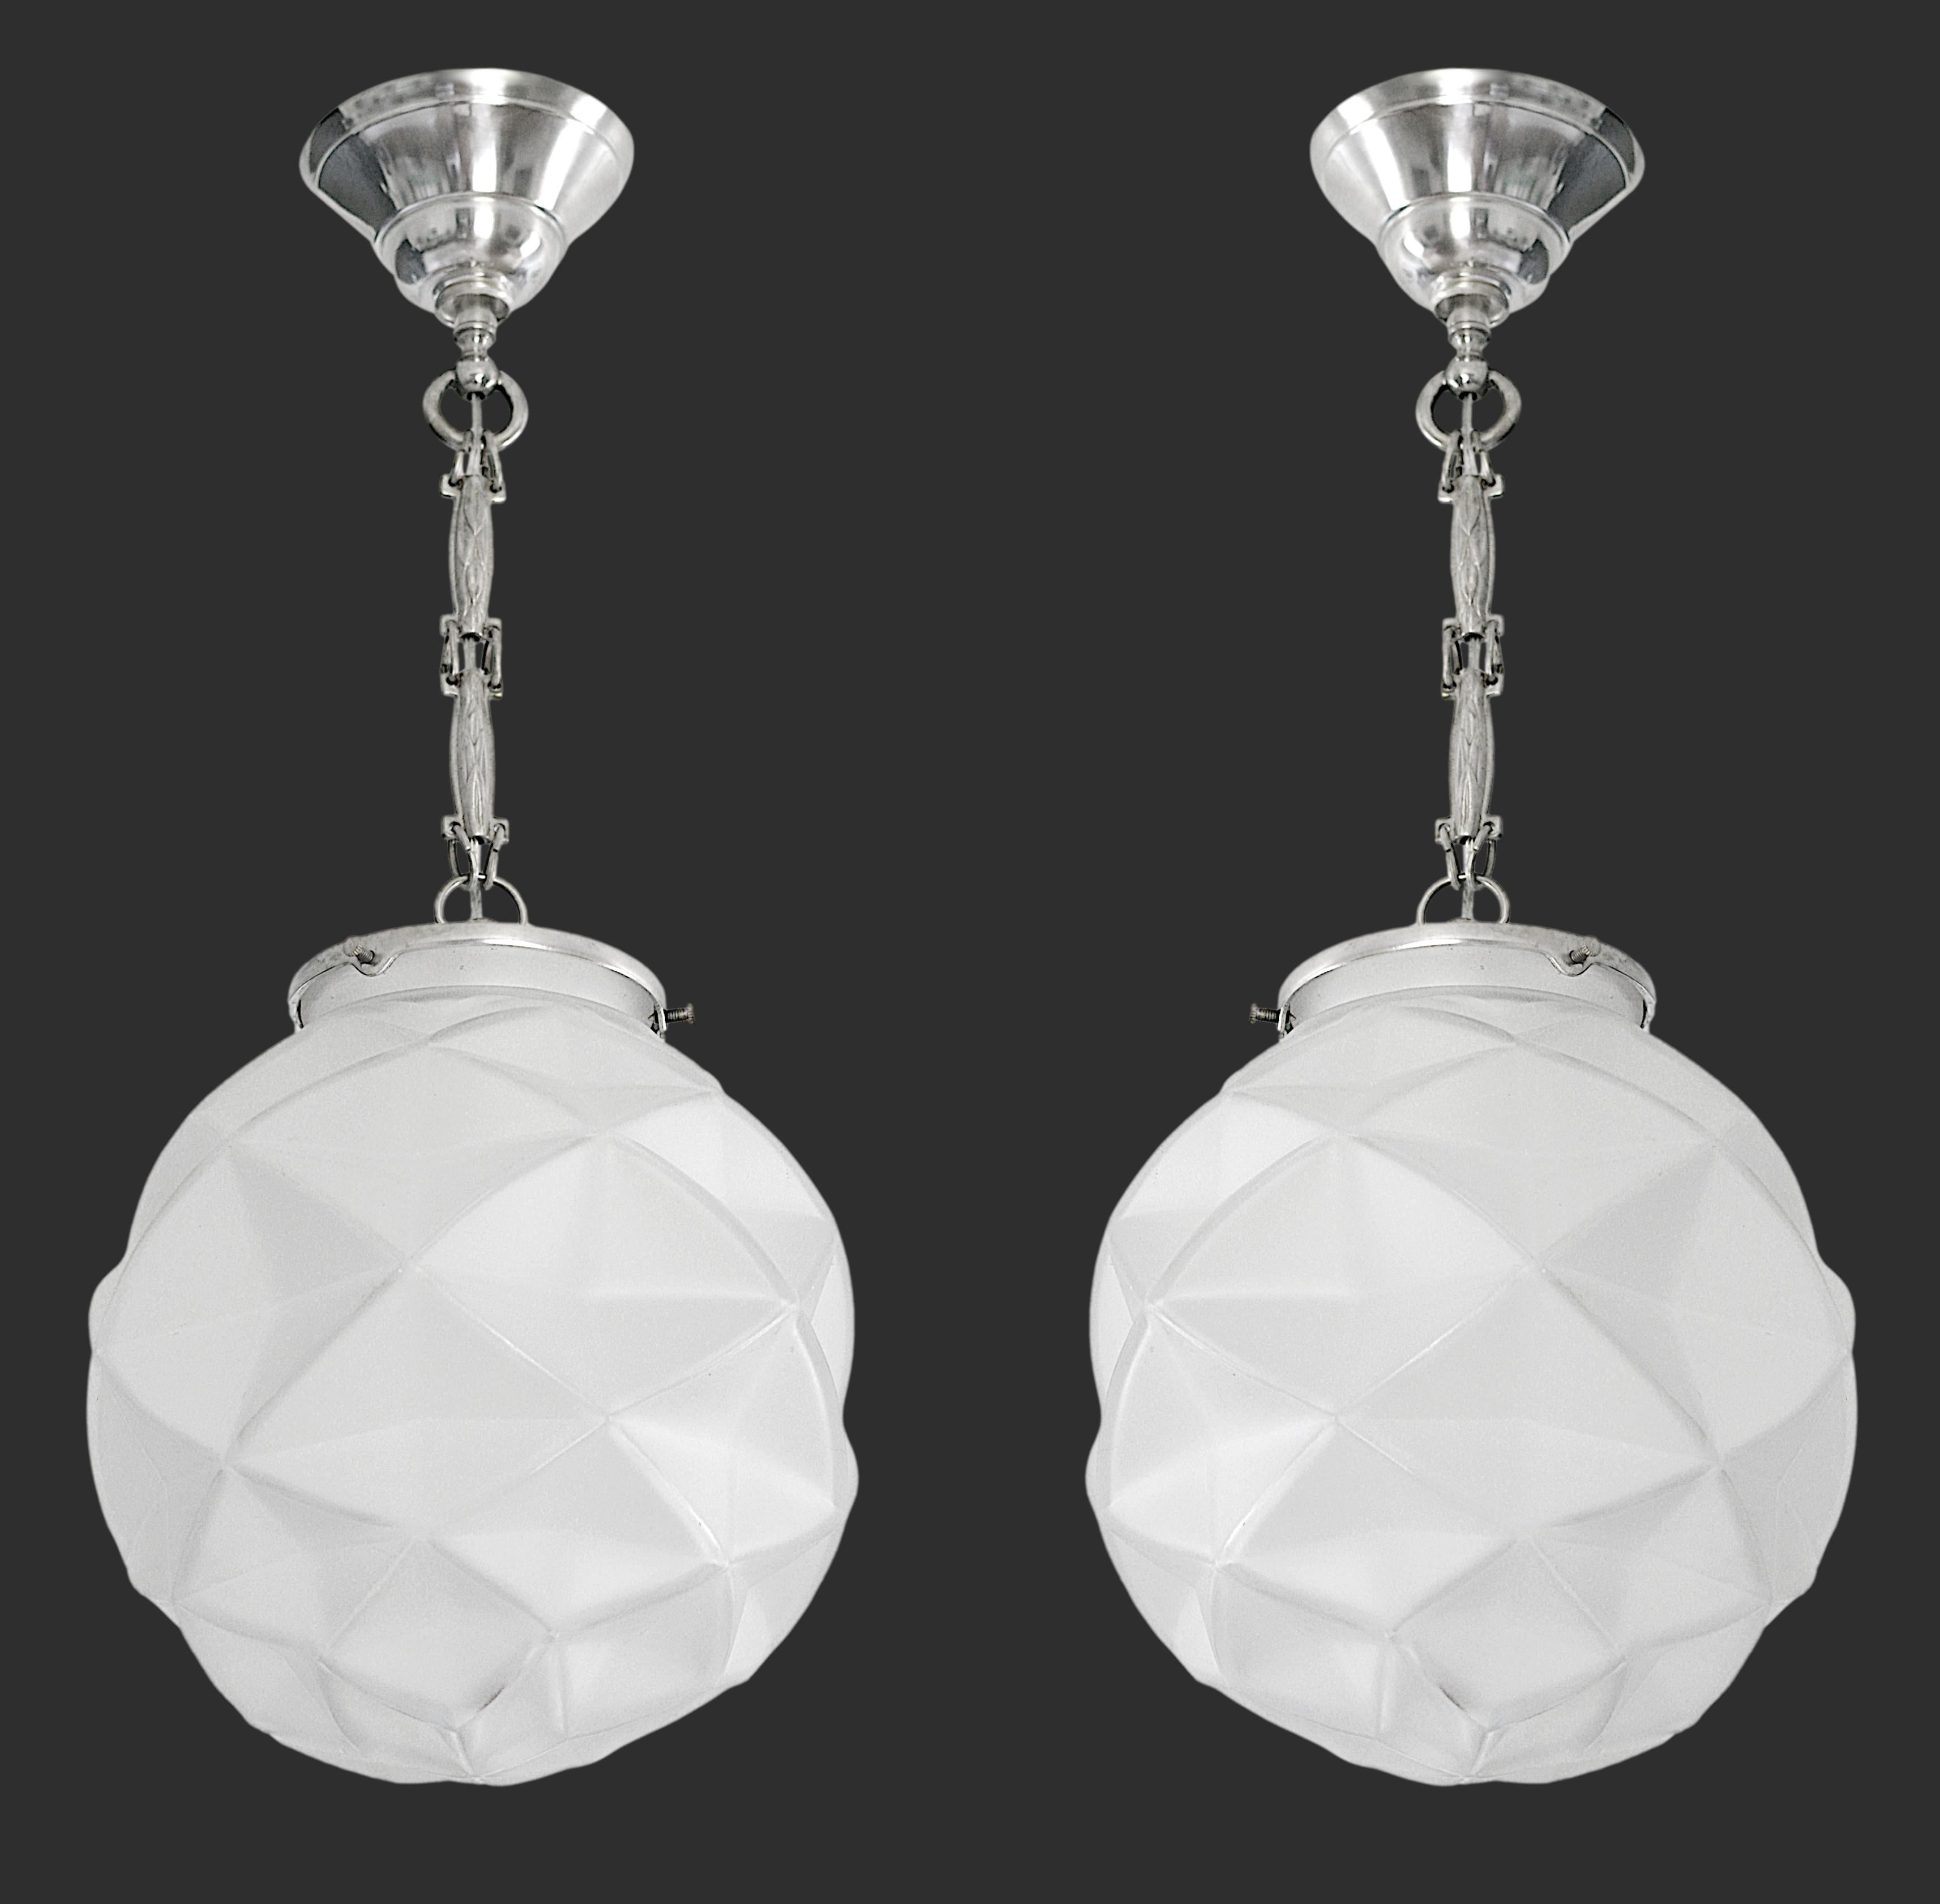 Pair of French Art Deco pendants chandeliers by DEGUE (Compiegne), France, ca. 1930. White frosted glass shade hung at its nickel plated fixture. Stamped brass links. Each - Height: 19.7